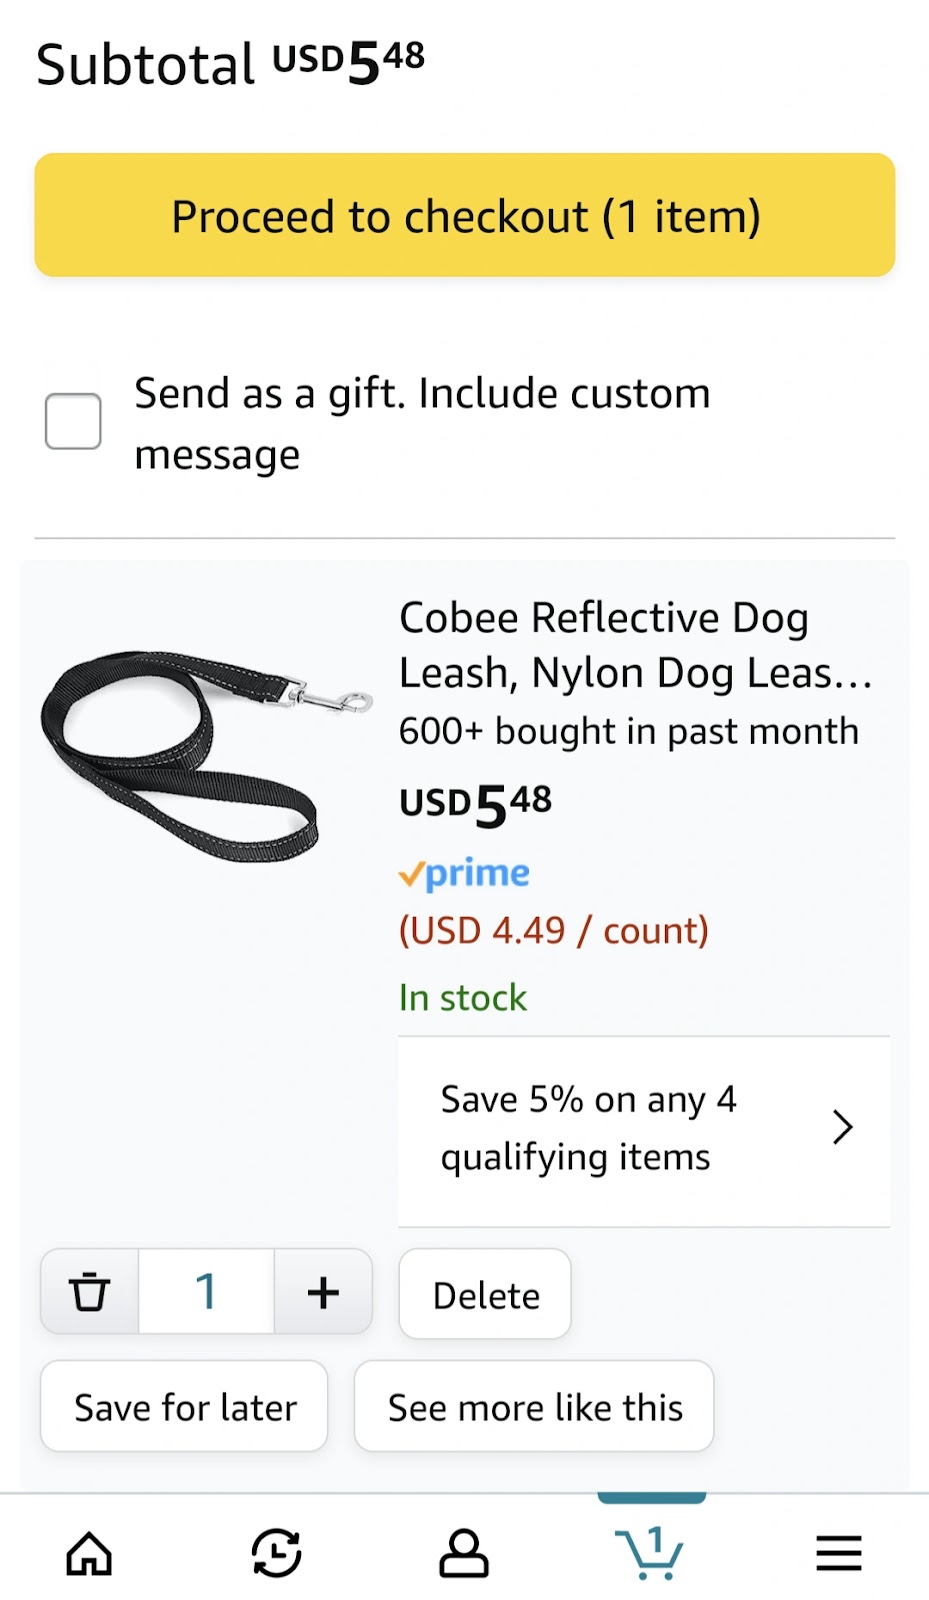 A product added to the cart on a desktop version of the Amazon website